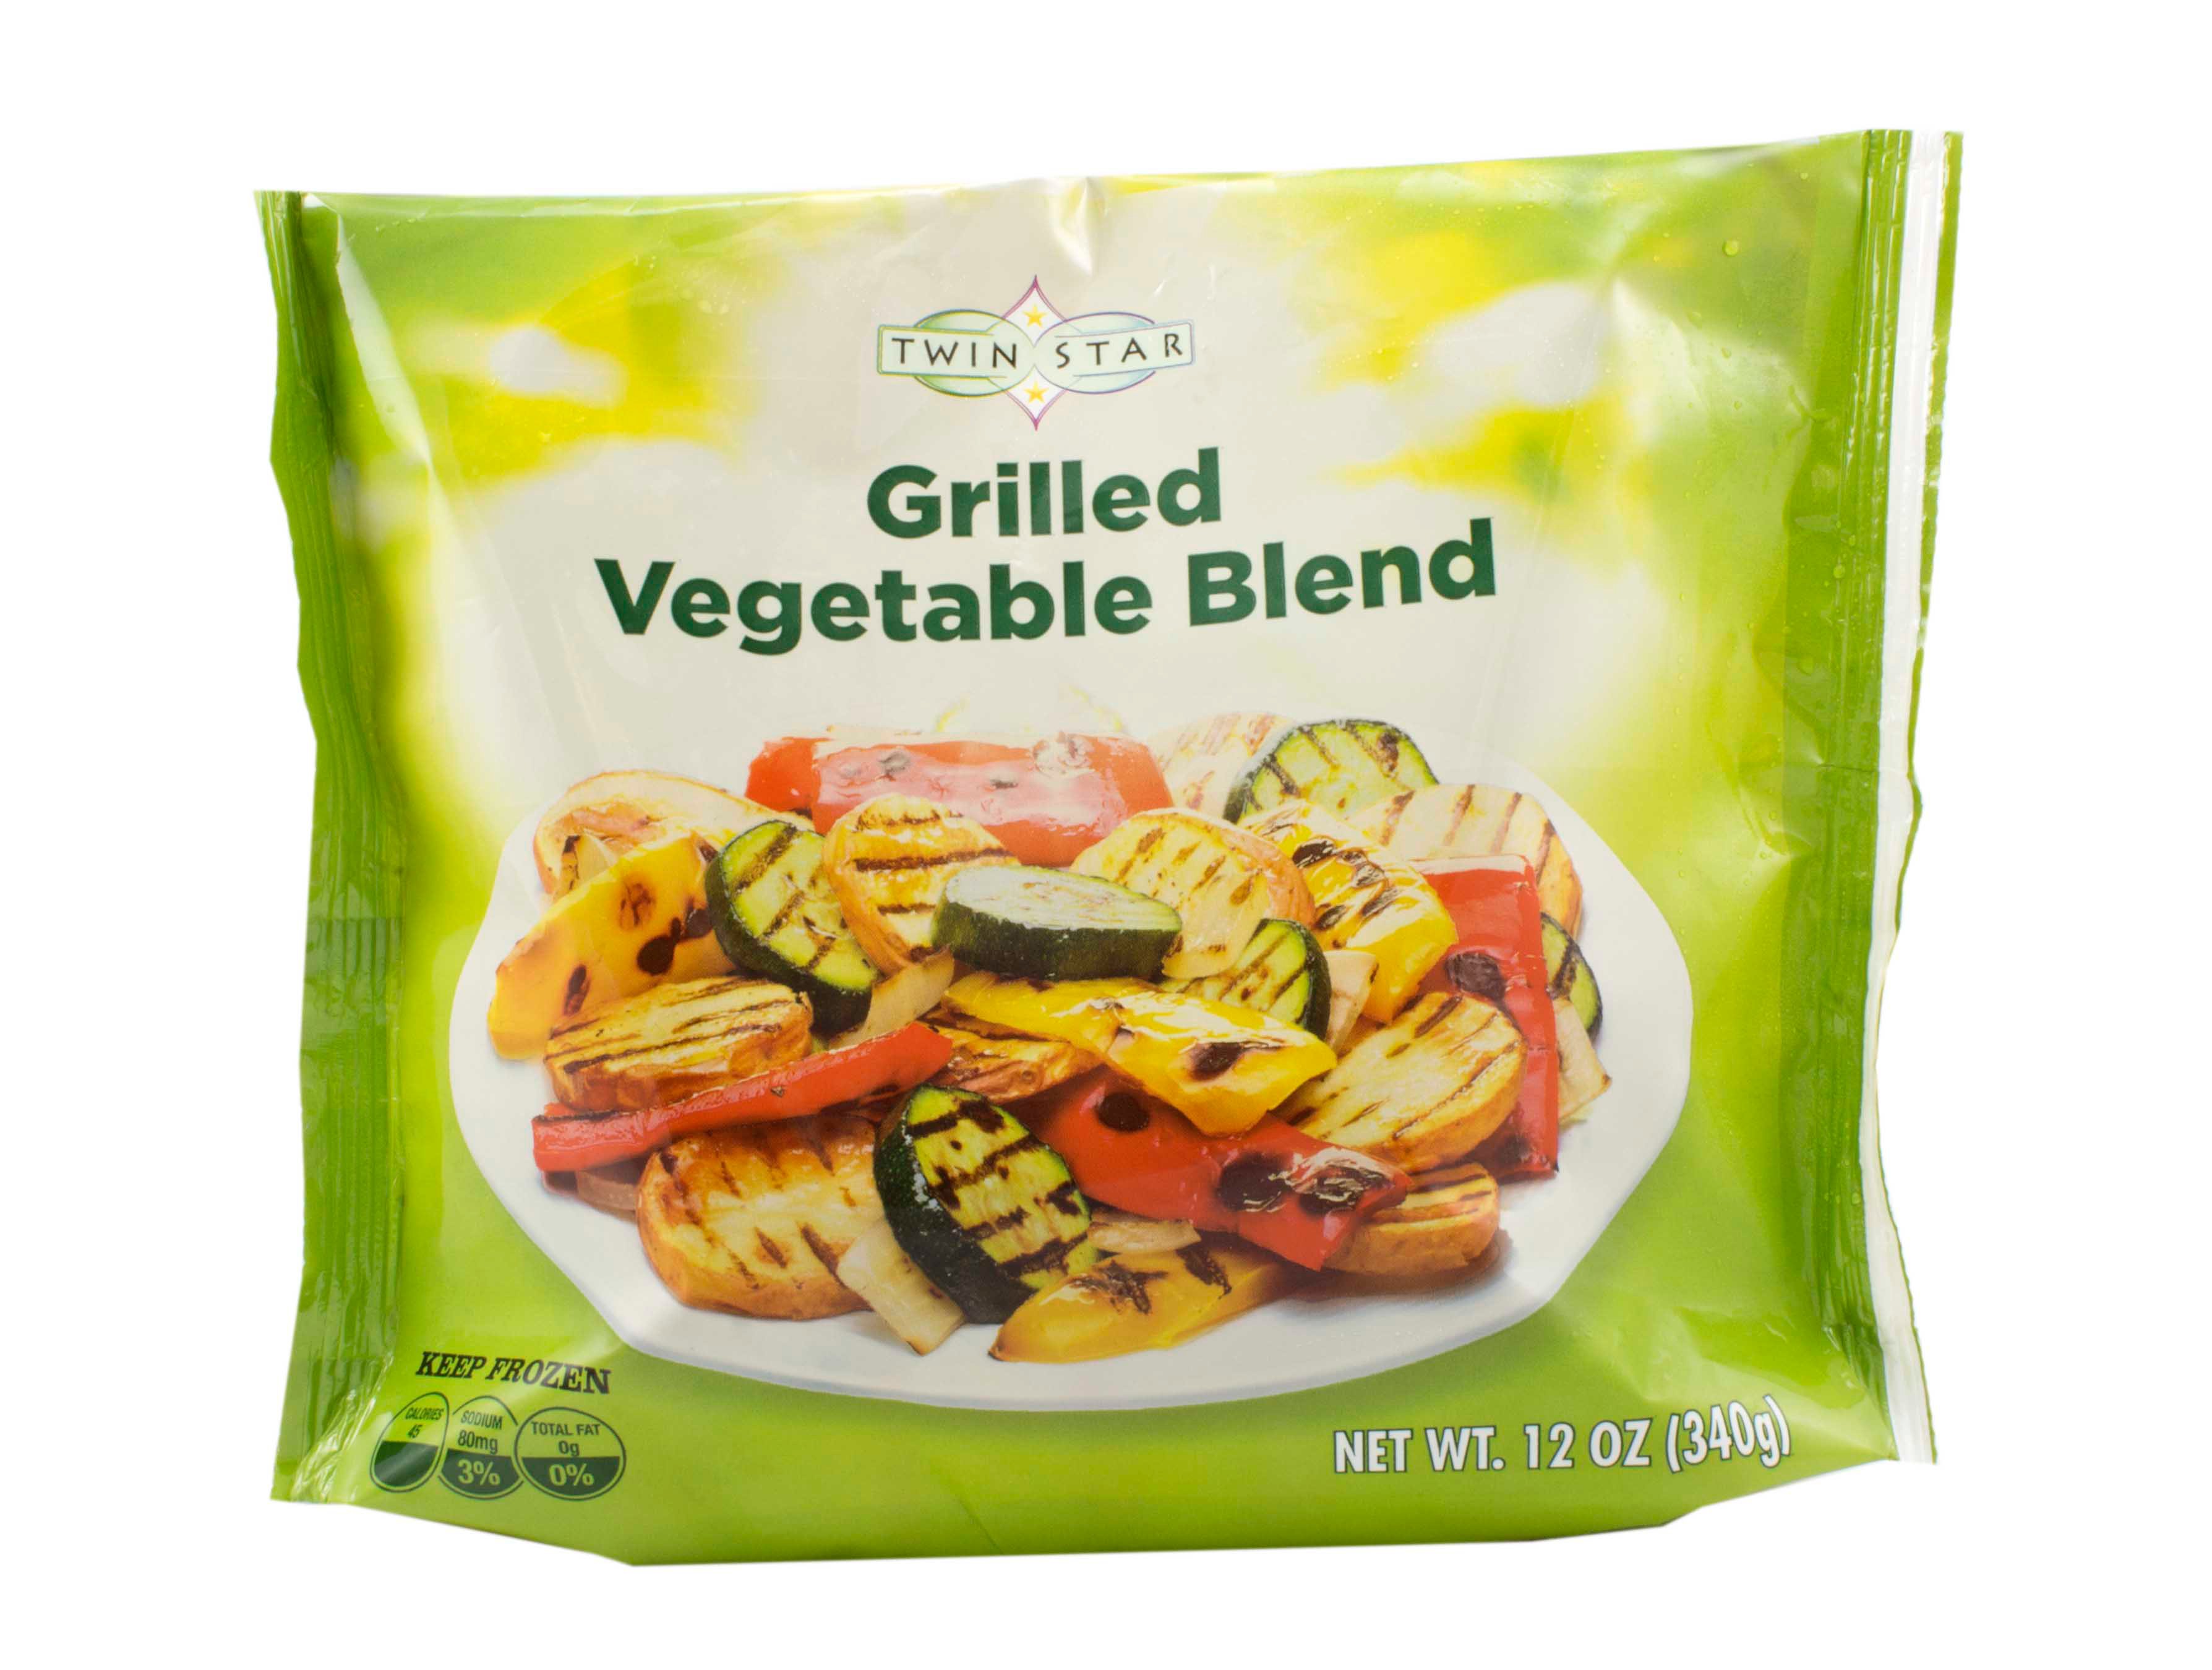 Twin Star Grilled Vegetable Blend Shop Mixed Vegetables At H E B